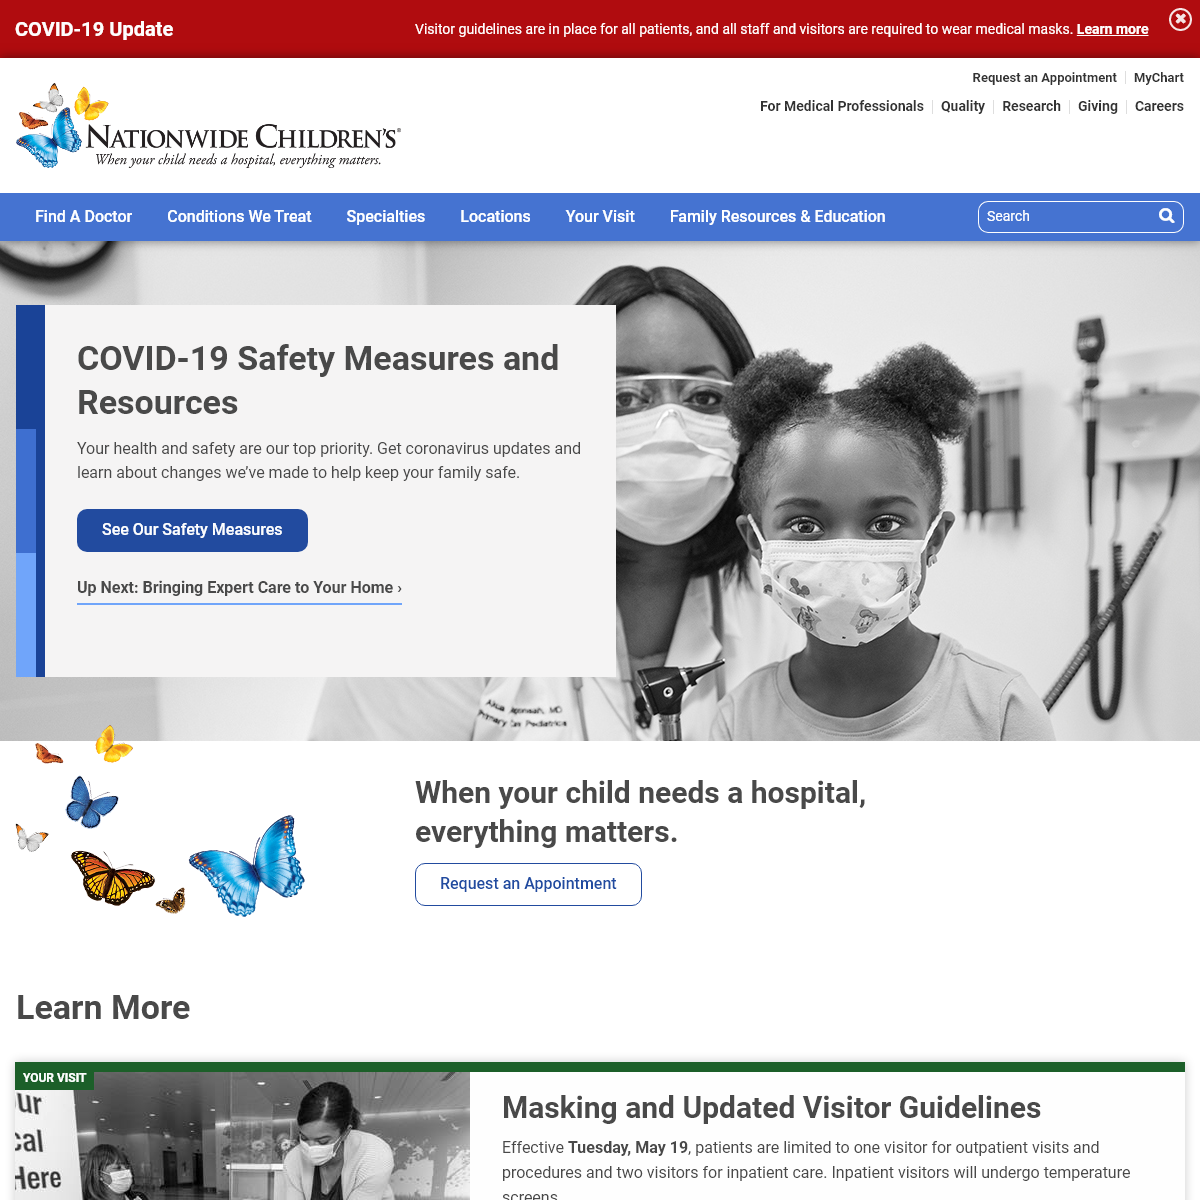 A complete backup of nationwidechildrens.org